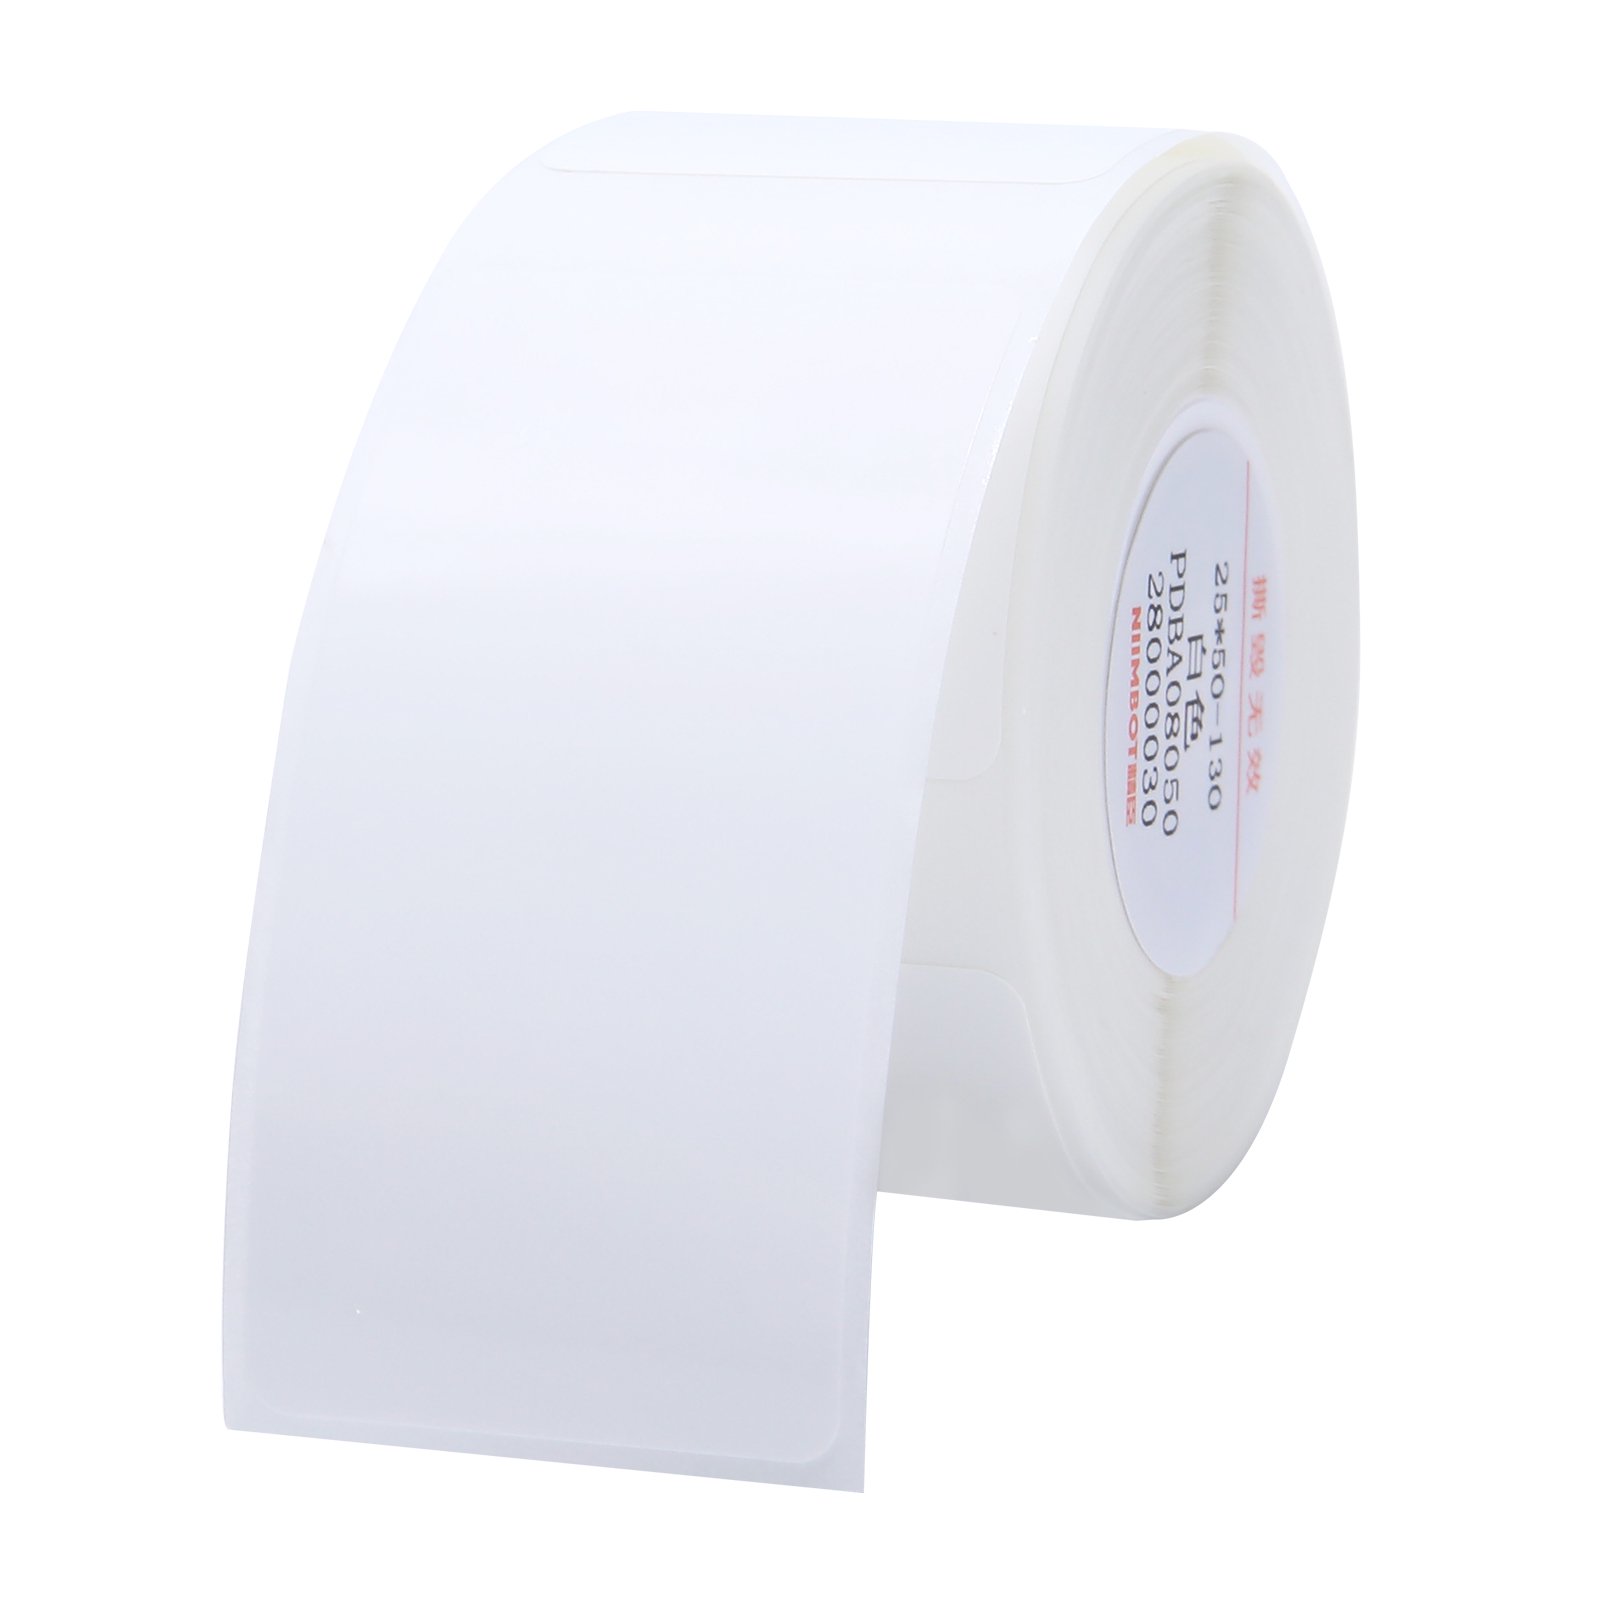 Thermal Cable Label Paper for D101 Label Printer Barcode Price Size Name Blank Labels Waterproof Tear Resistant 25x50mm 130sheets/roll for Price Office Supplies Clothing Stores Cable Wires